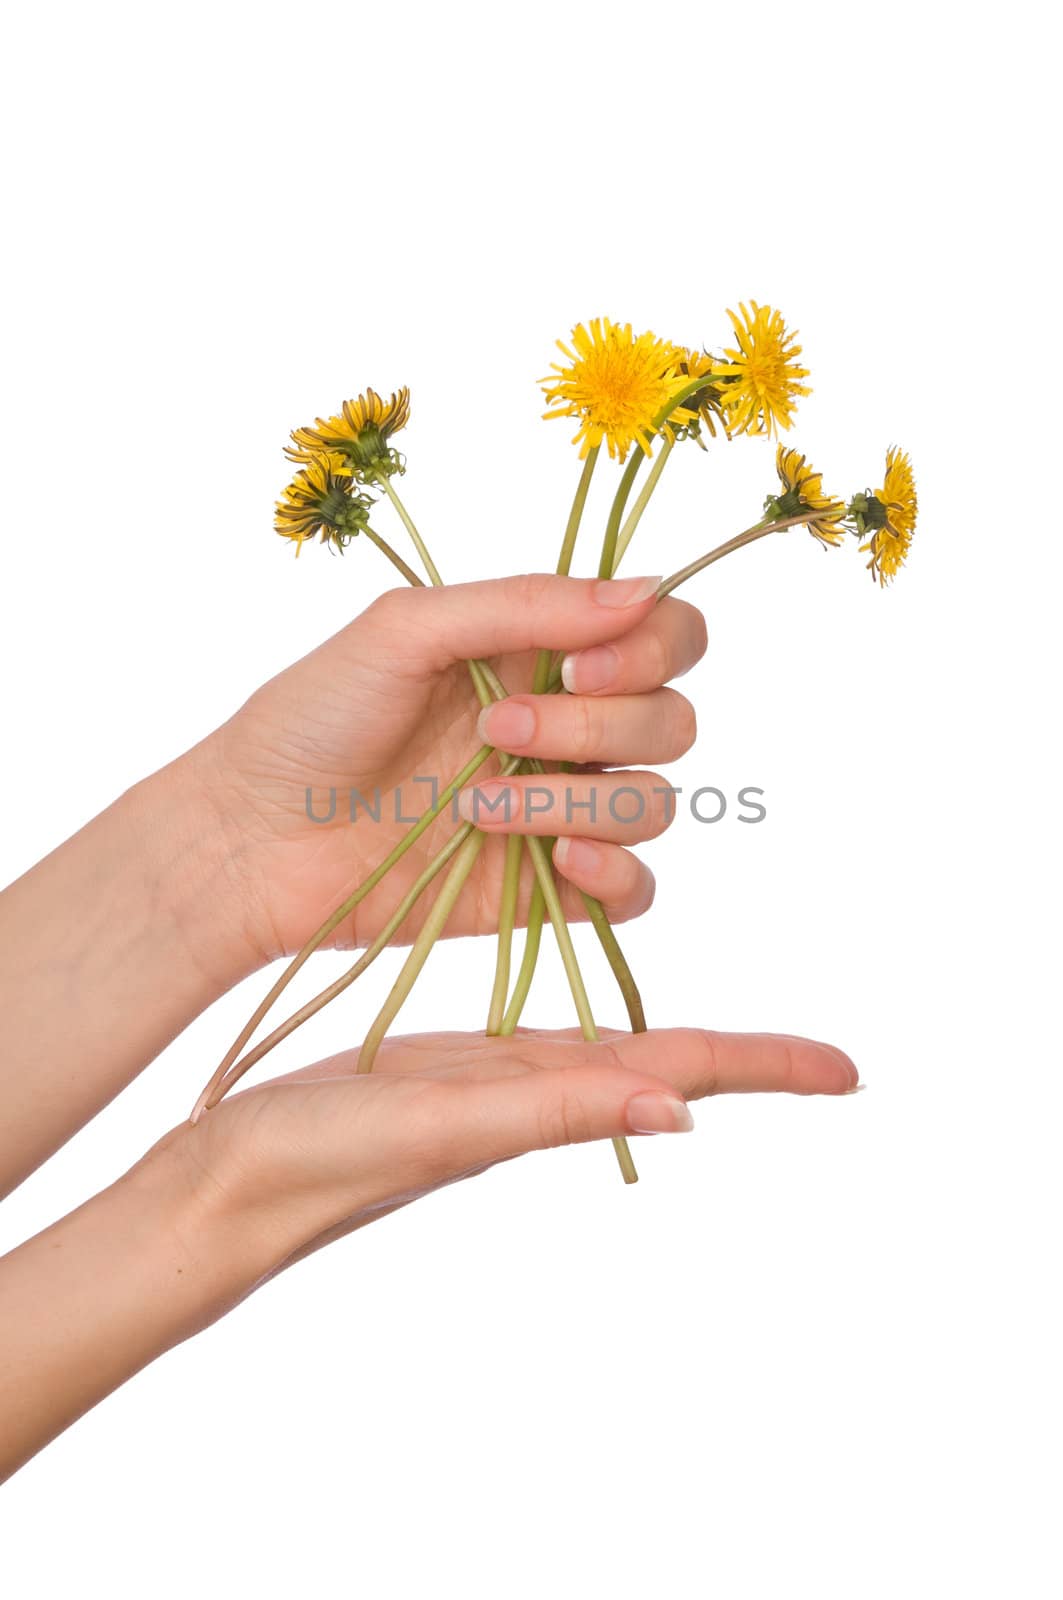 a few yellow dandelions in the woman's hand